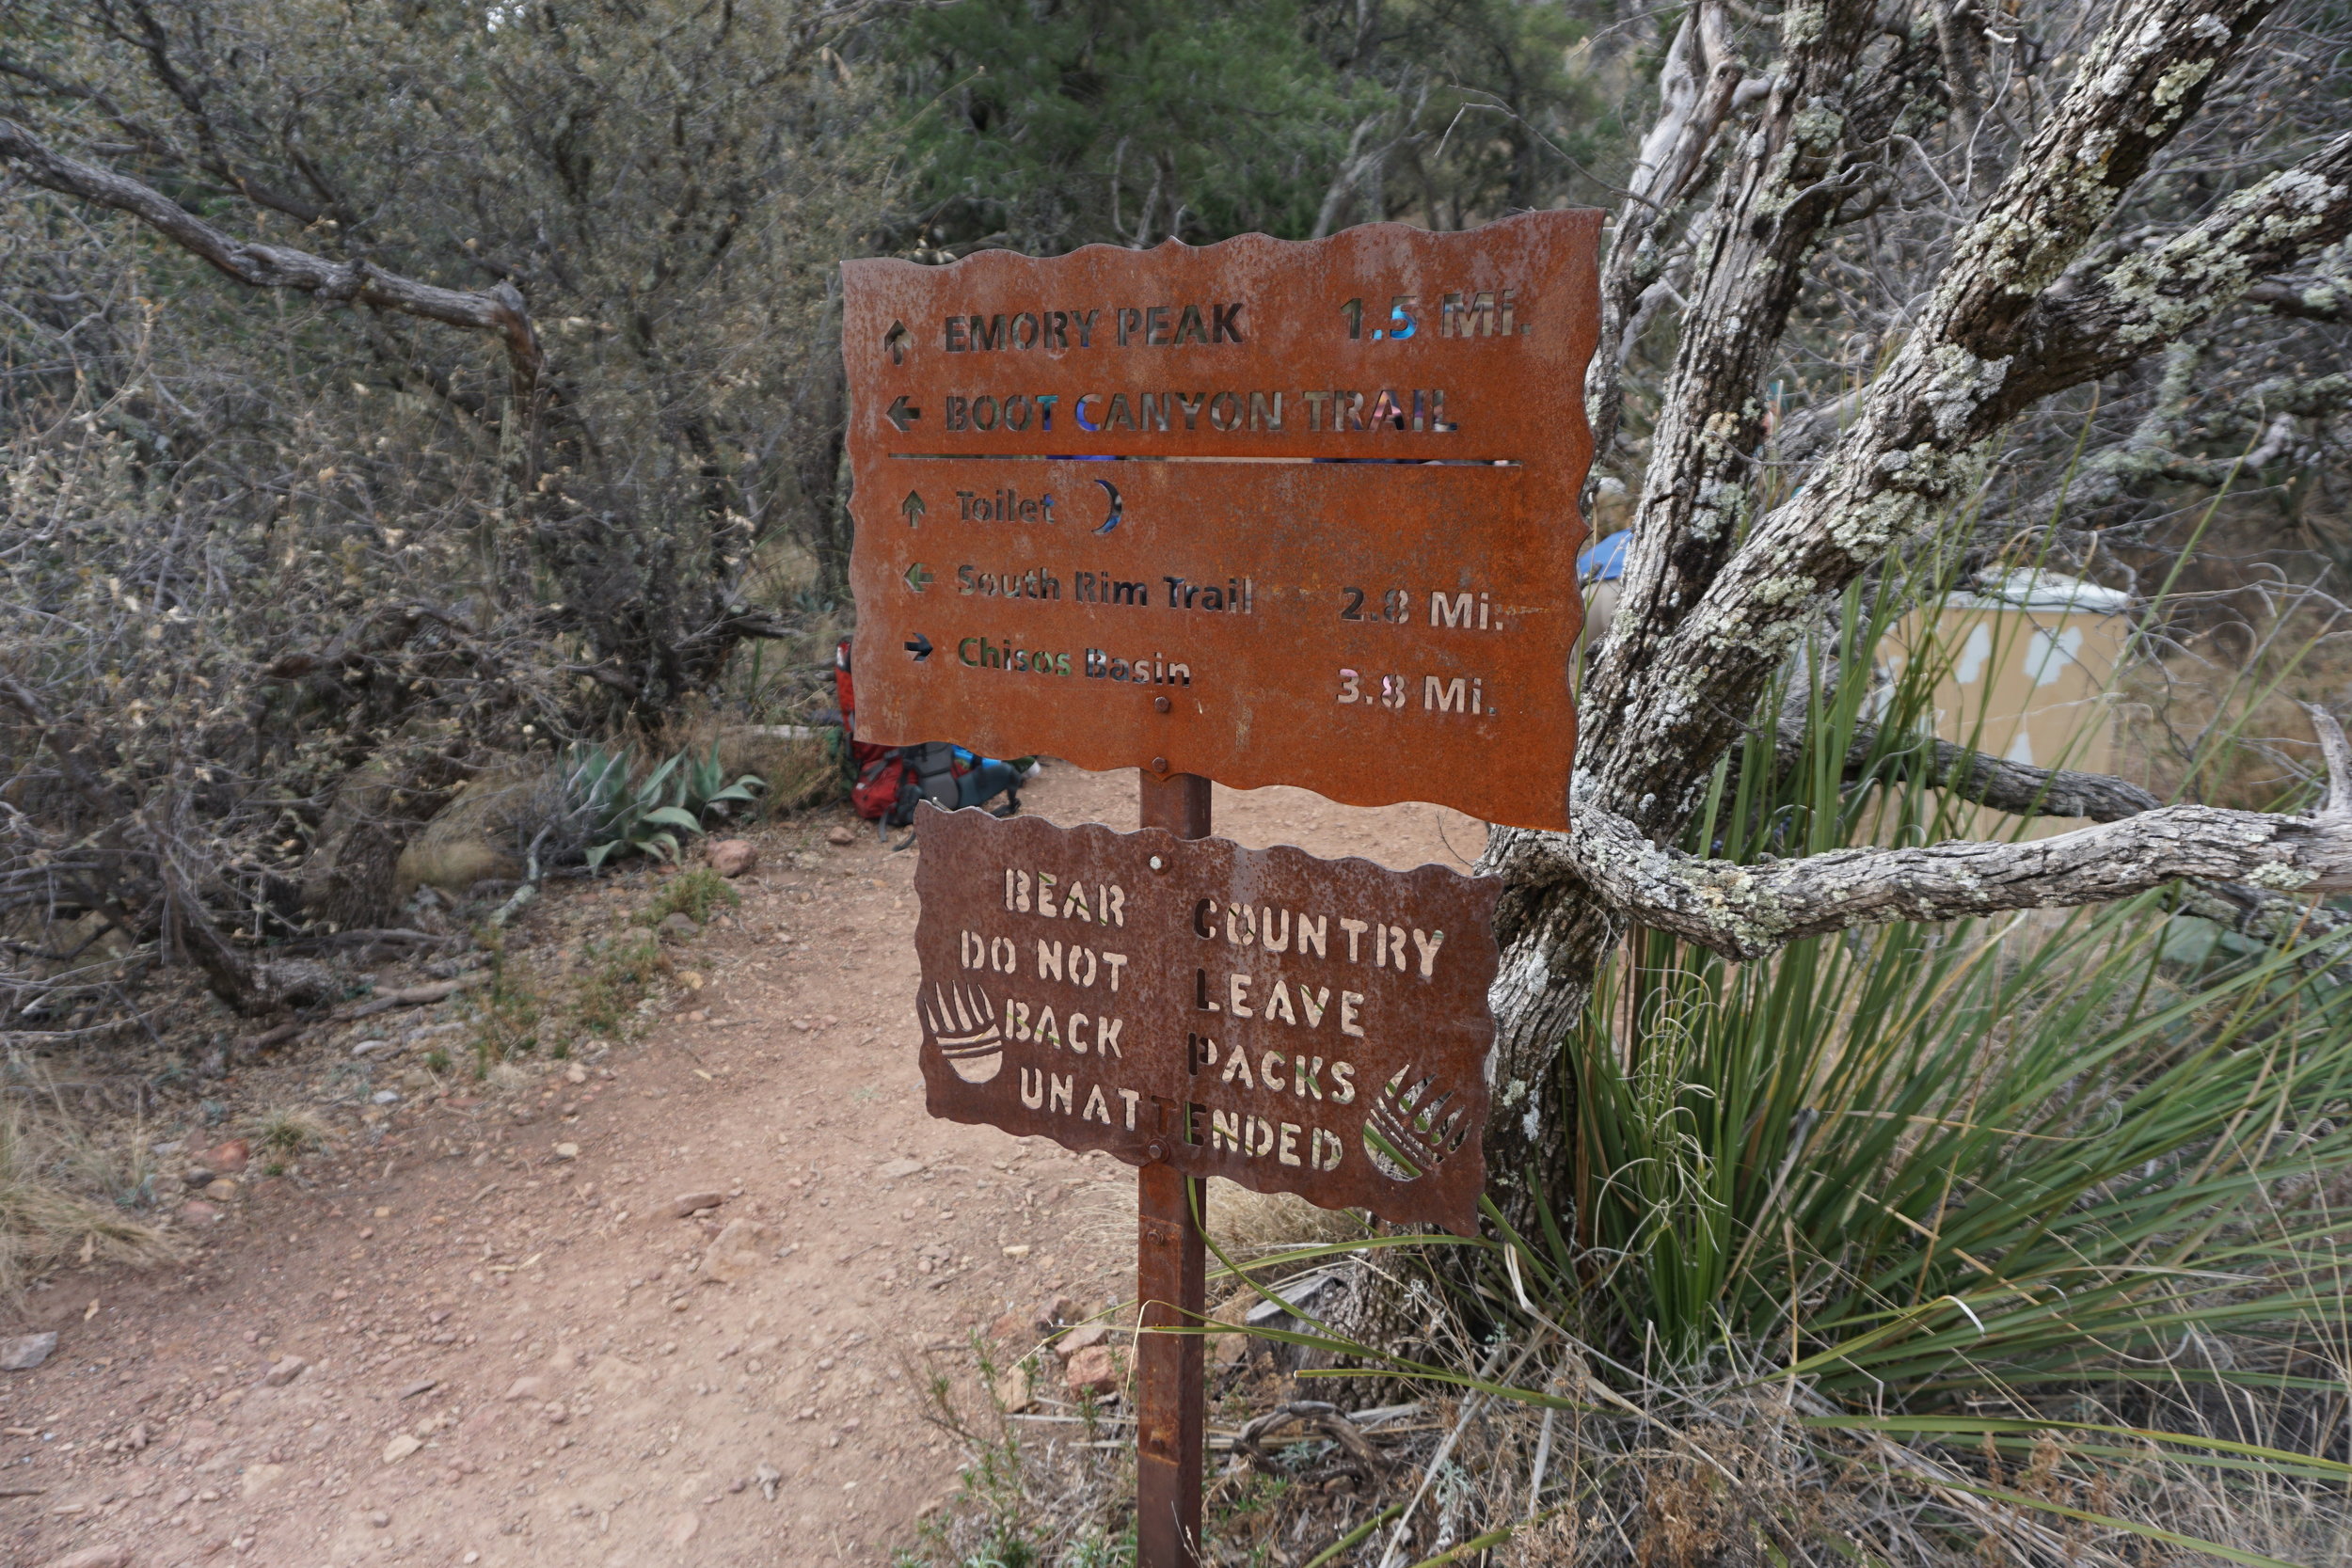 Sign on hiking path to Emory Peak in Big Bend Texas